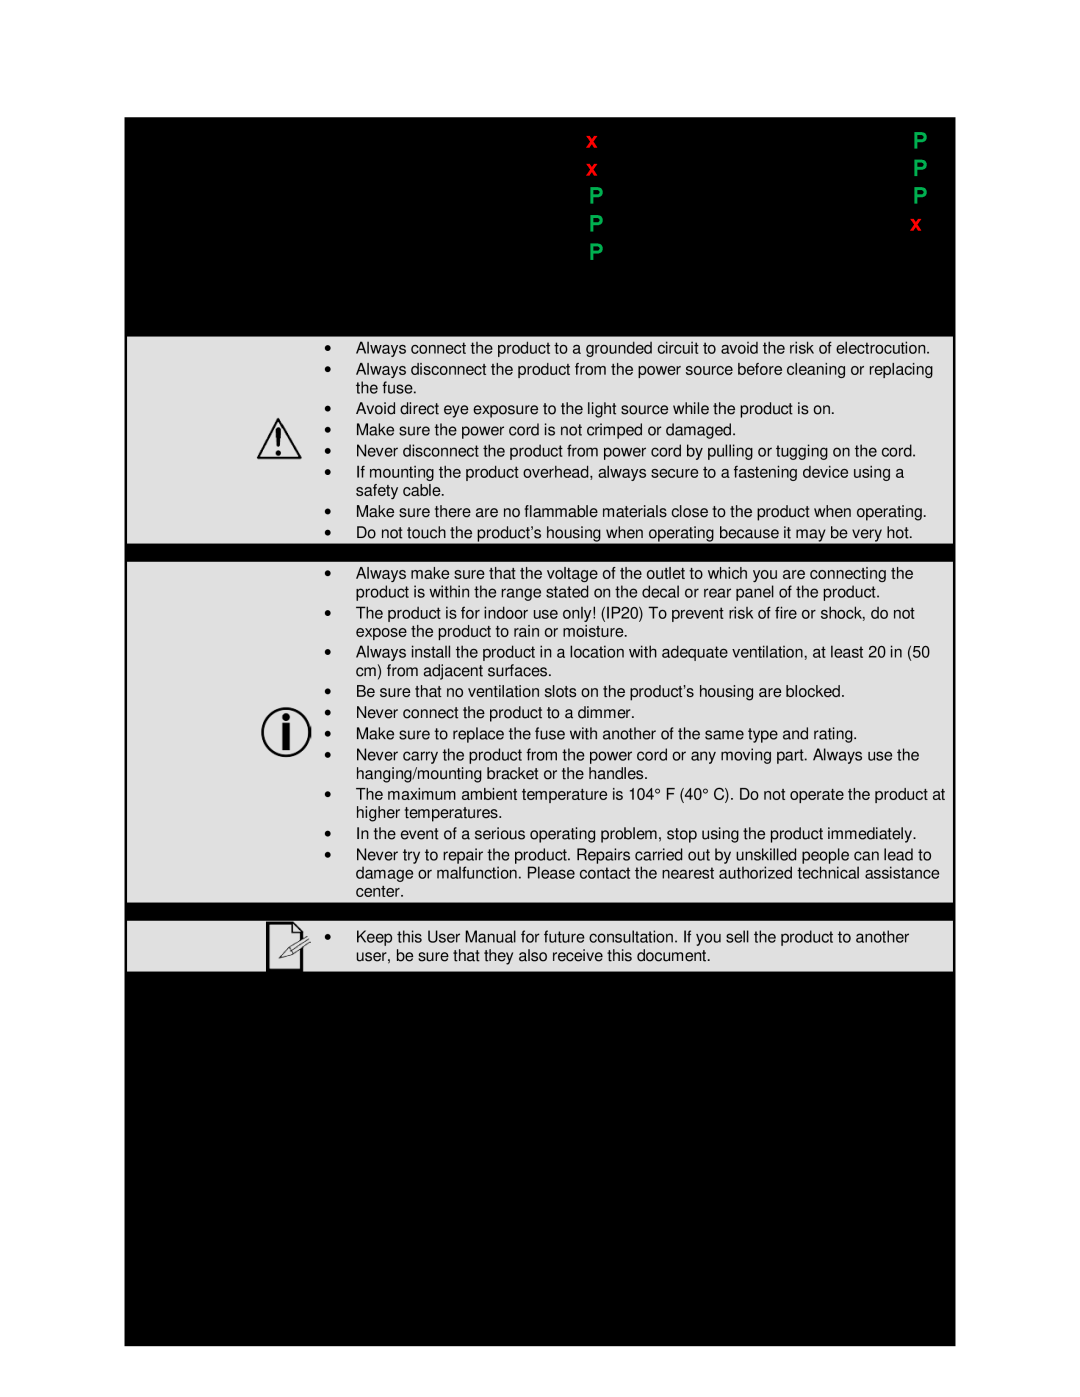 Chauvet 648 user manual Product at a Glance, P P P 